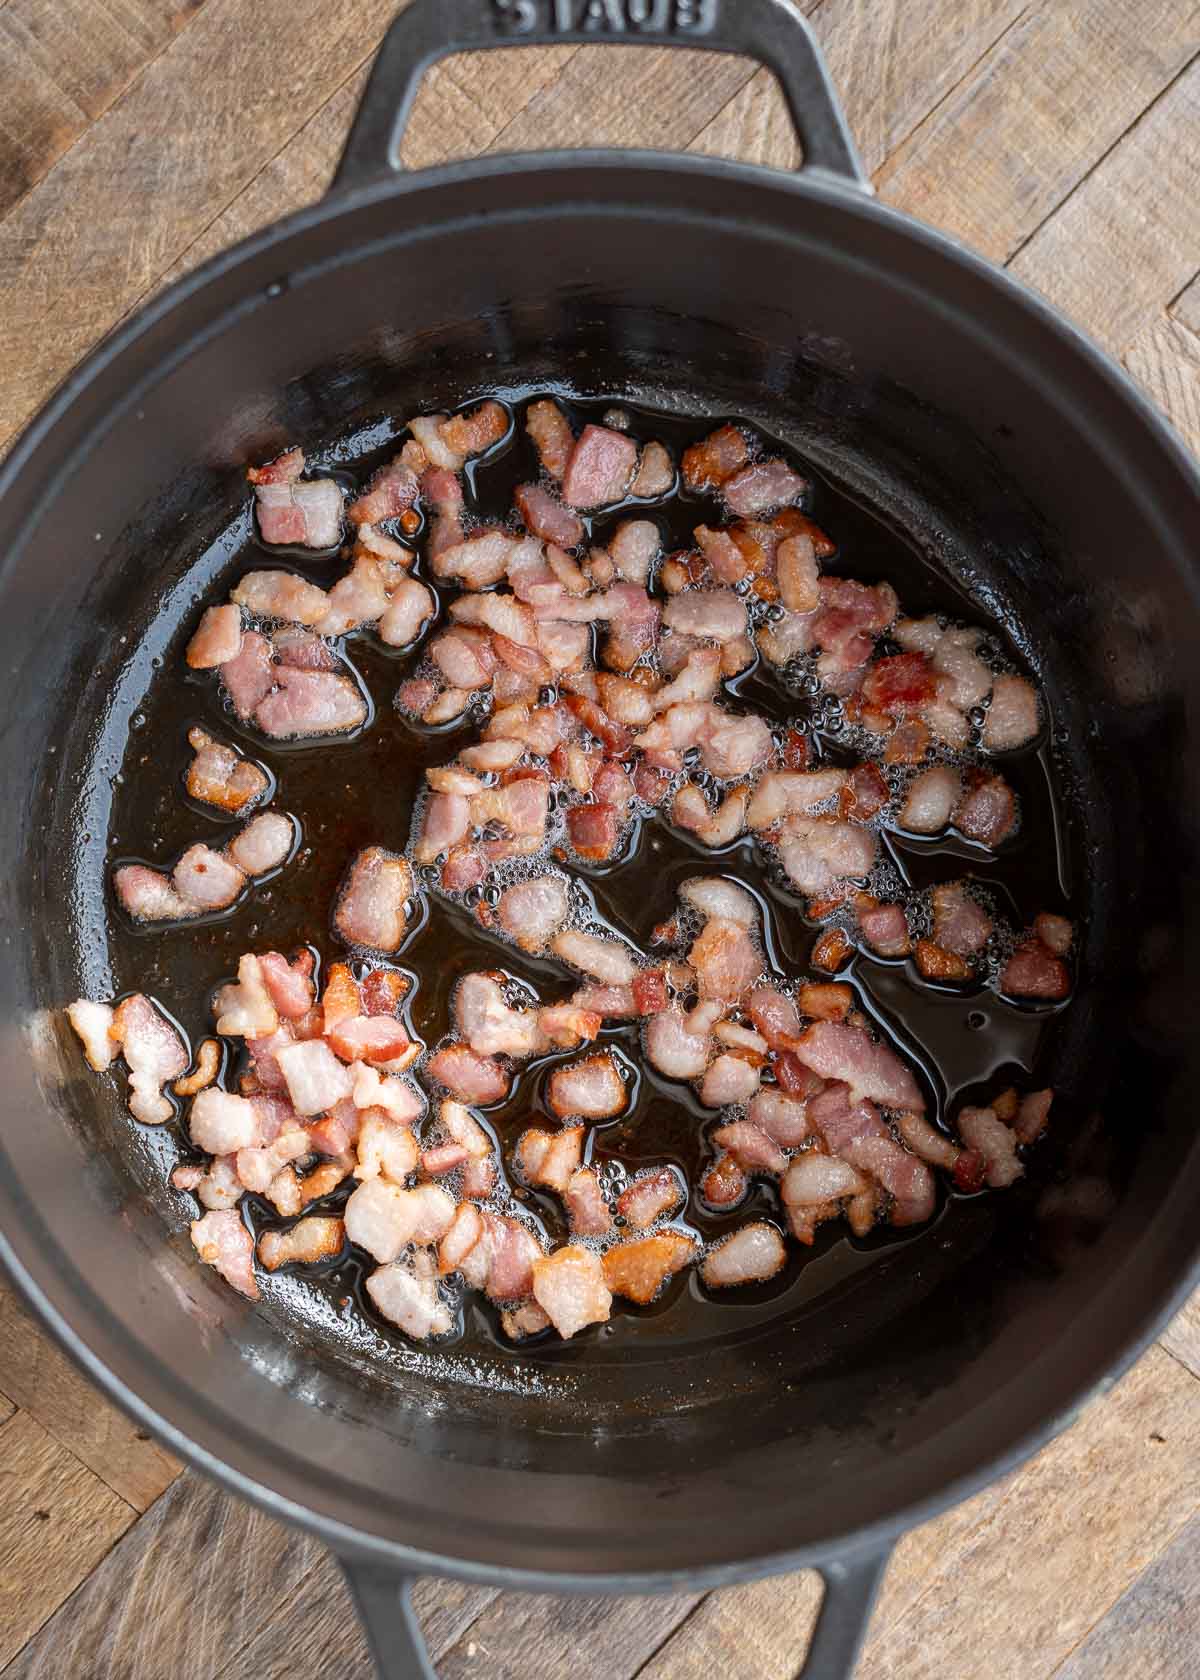 small bacon pieces crisping in a pan